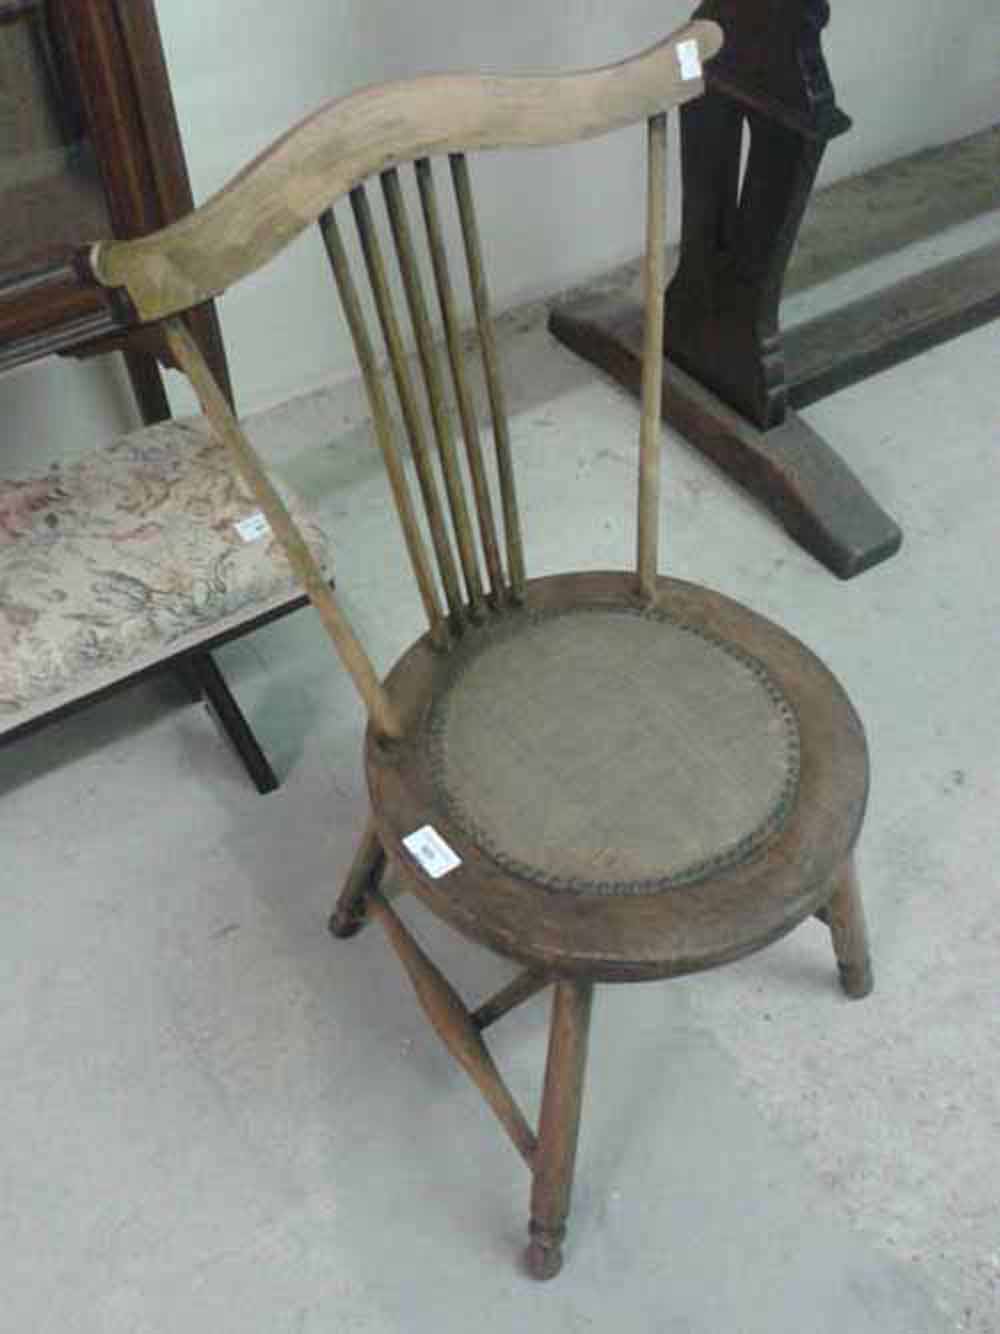 Childs wooden chair with round seat & spindle back